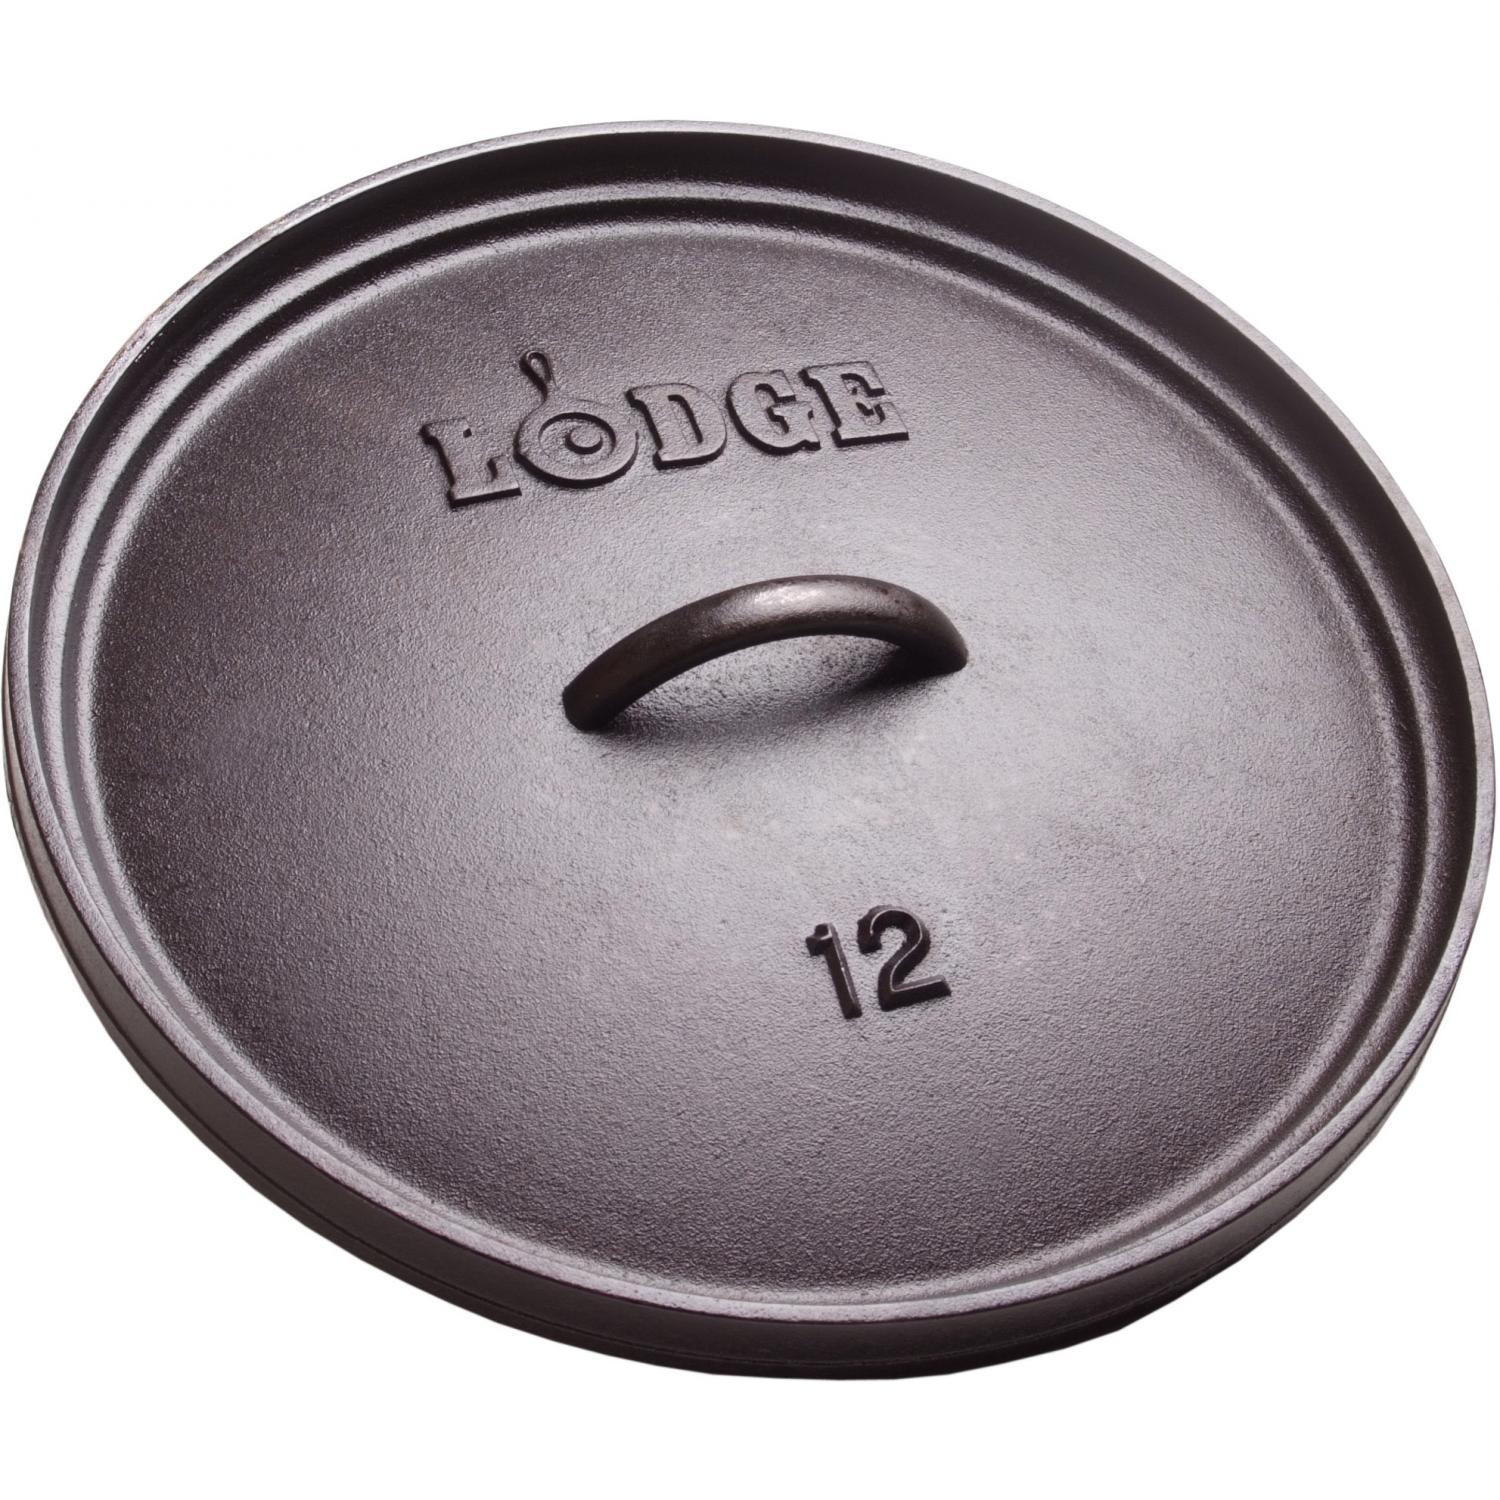 Lodge Lids 12 Inch Seasoned For Camping Dutch Oven Cast Iron Lid - L12CL3